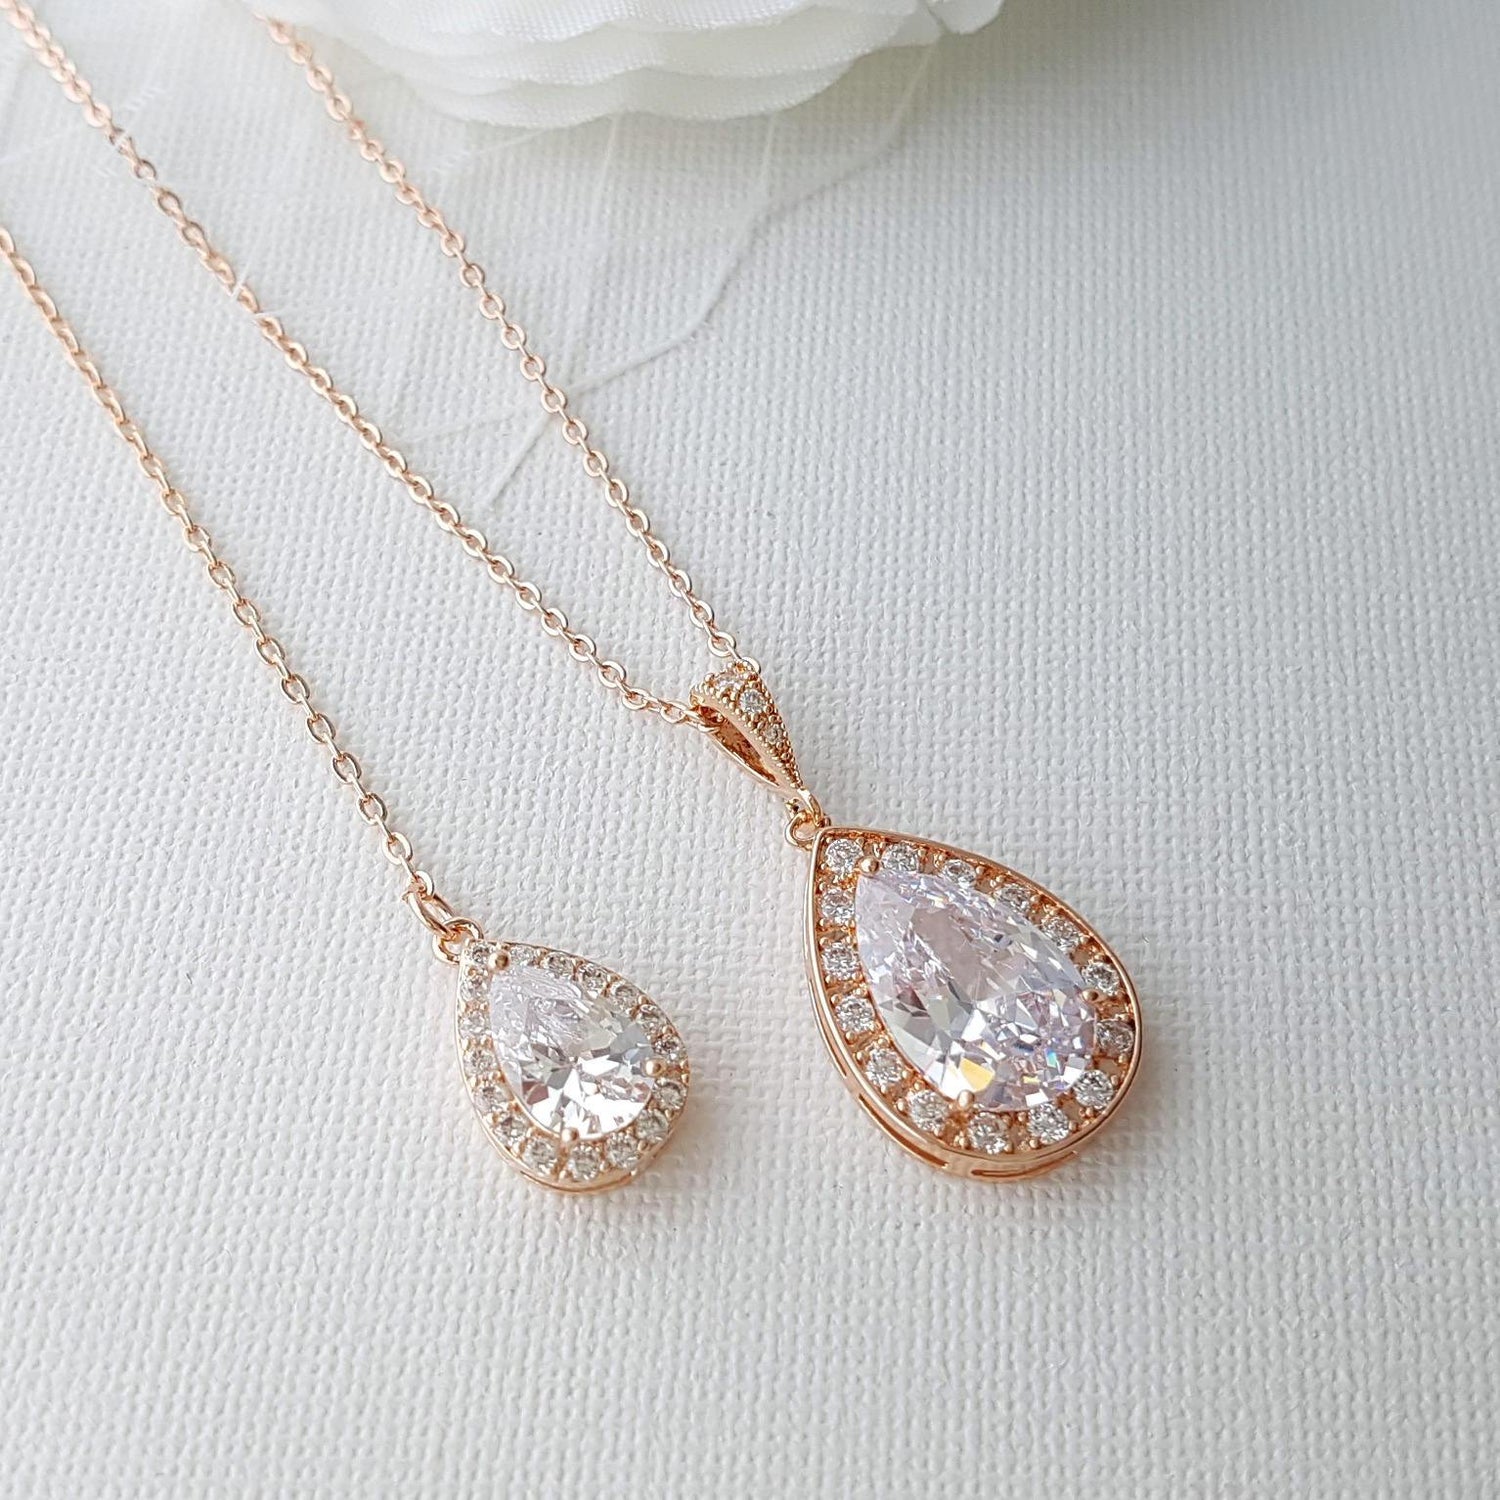 Simple Wedding Back Necklace, Crystal Backdrop Bridal Necklace, Crystal Drop Necklace, Bridesmaid Necklace Gift, Bridal Jewelry, Evelyn - PoetryDesigns